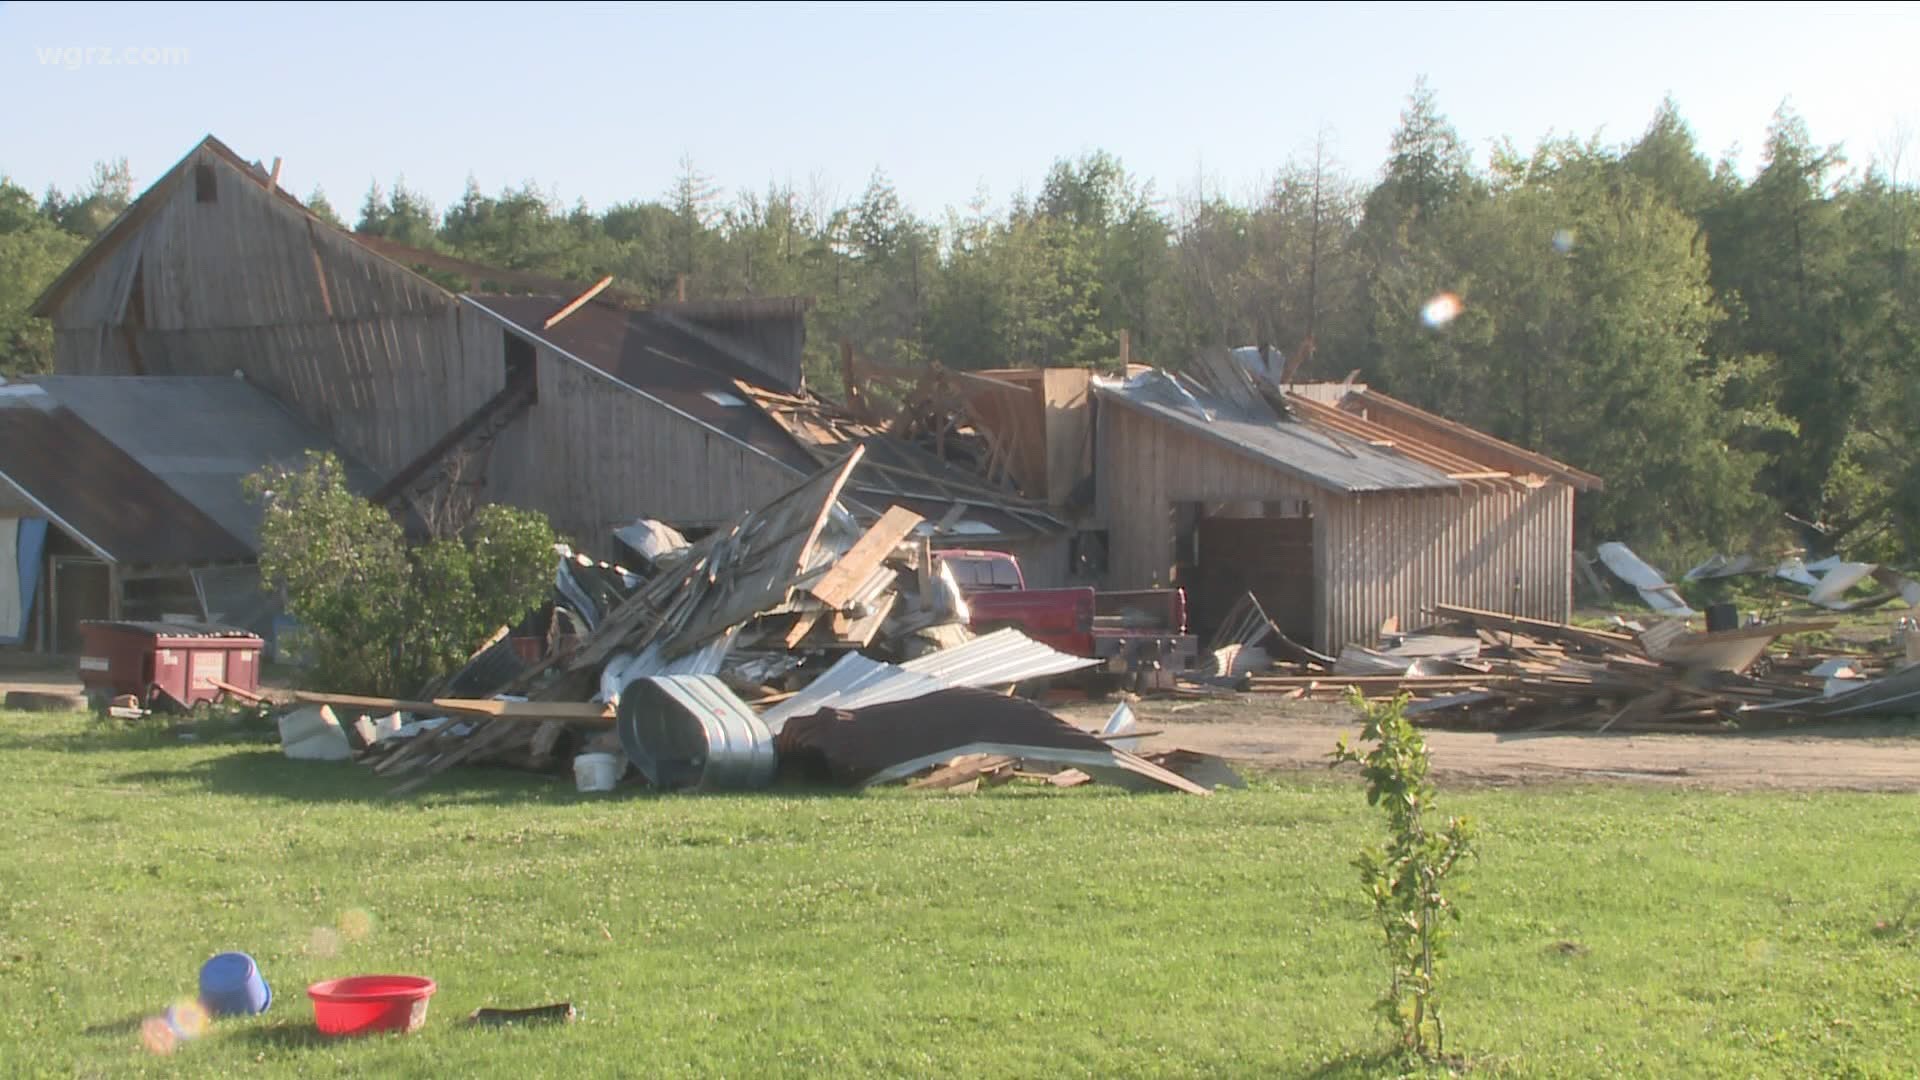 An EF1 tornado severely damaged several buildings including a home on Barnes Road.